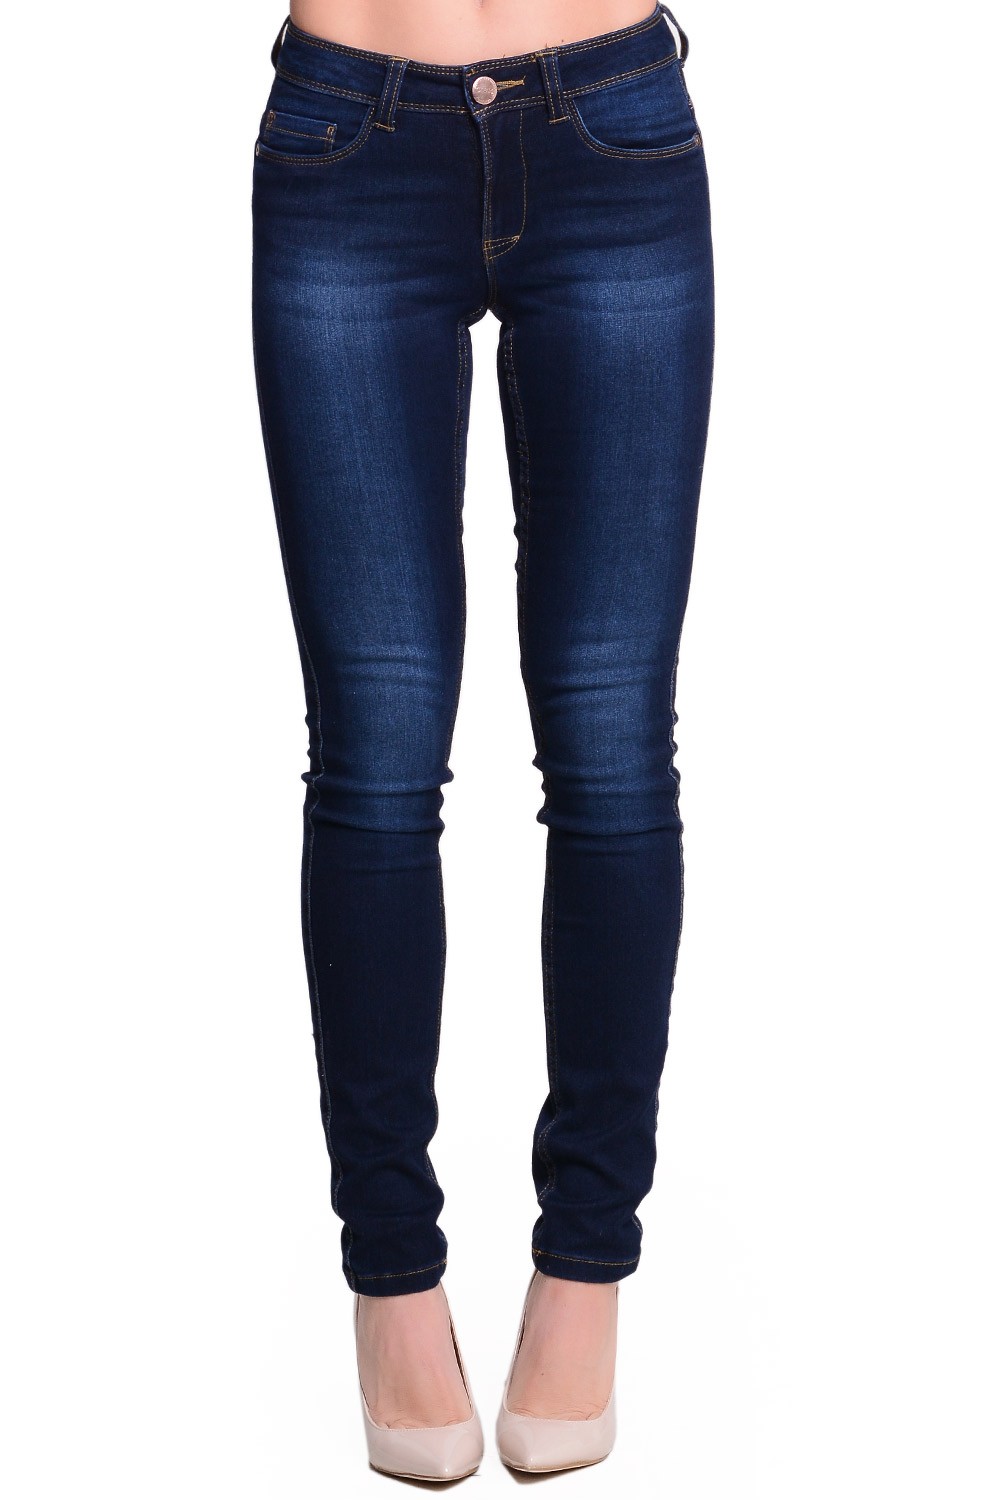 Only Nell Long Length Soft Skinny Jeans in Dark Blue | iCLOTHING